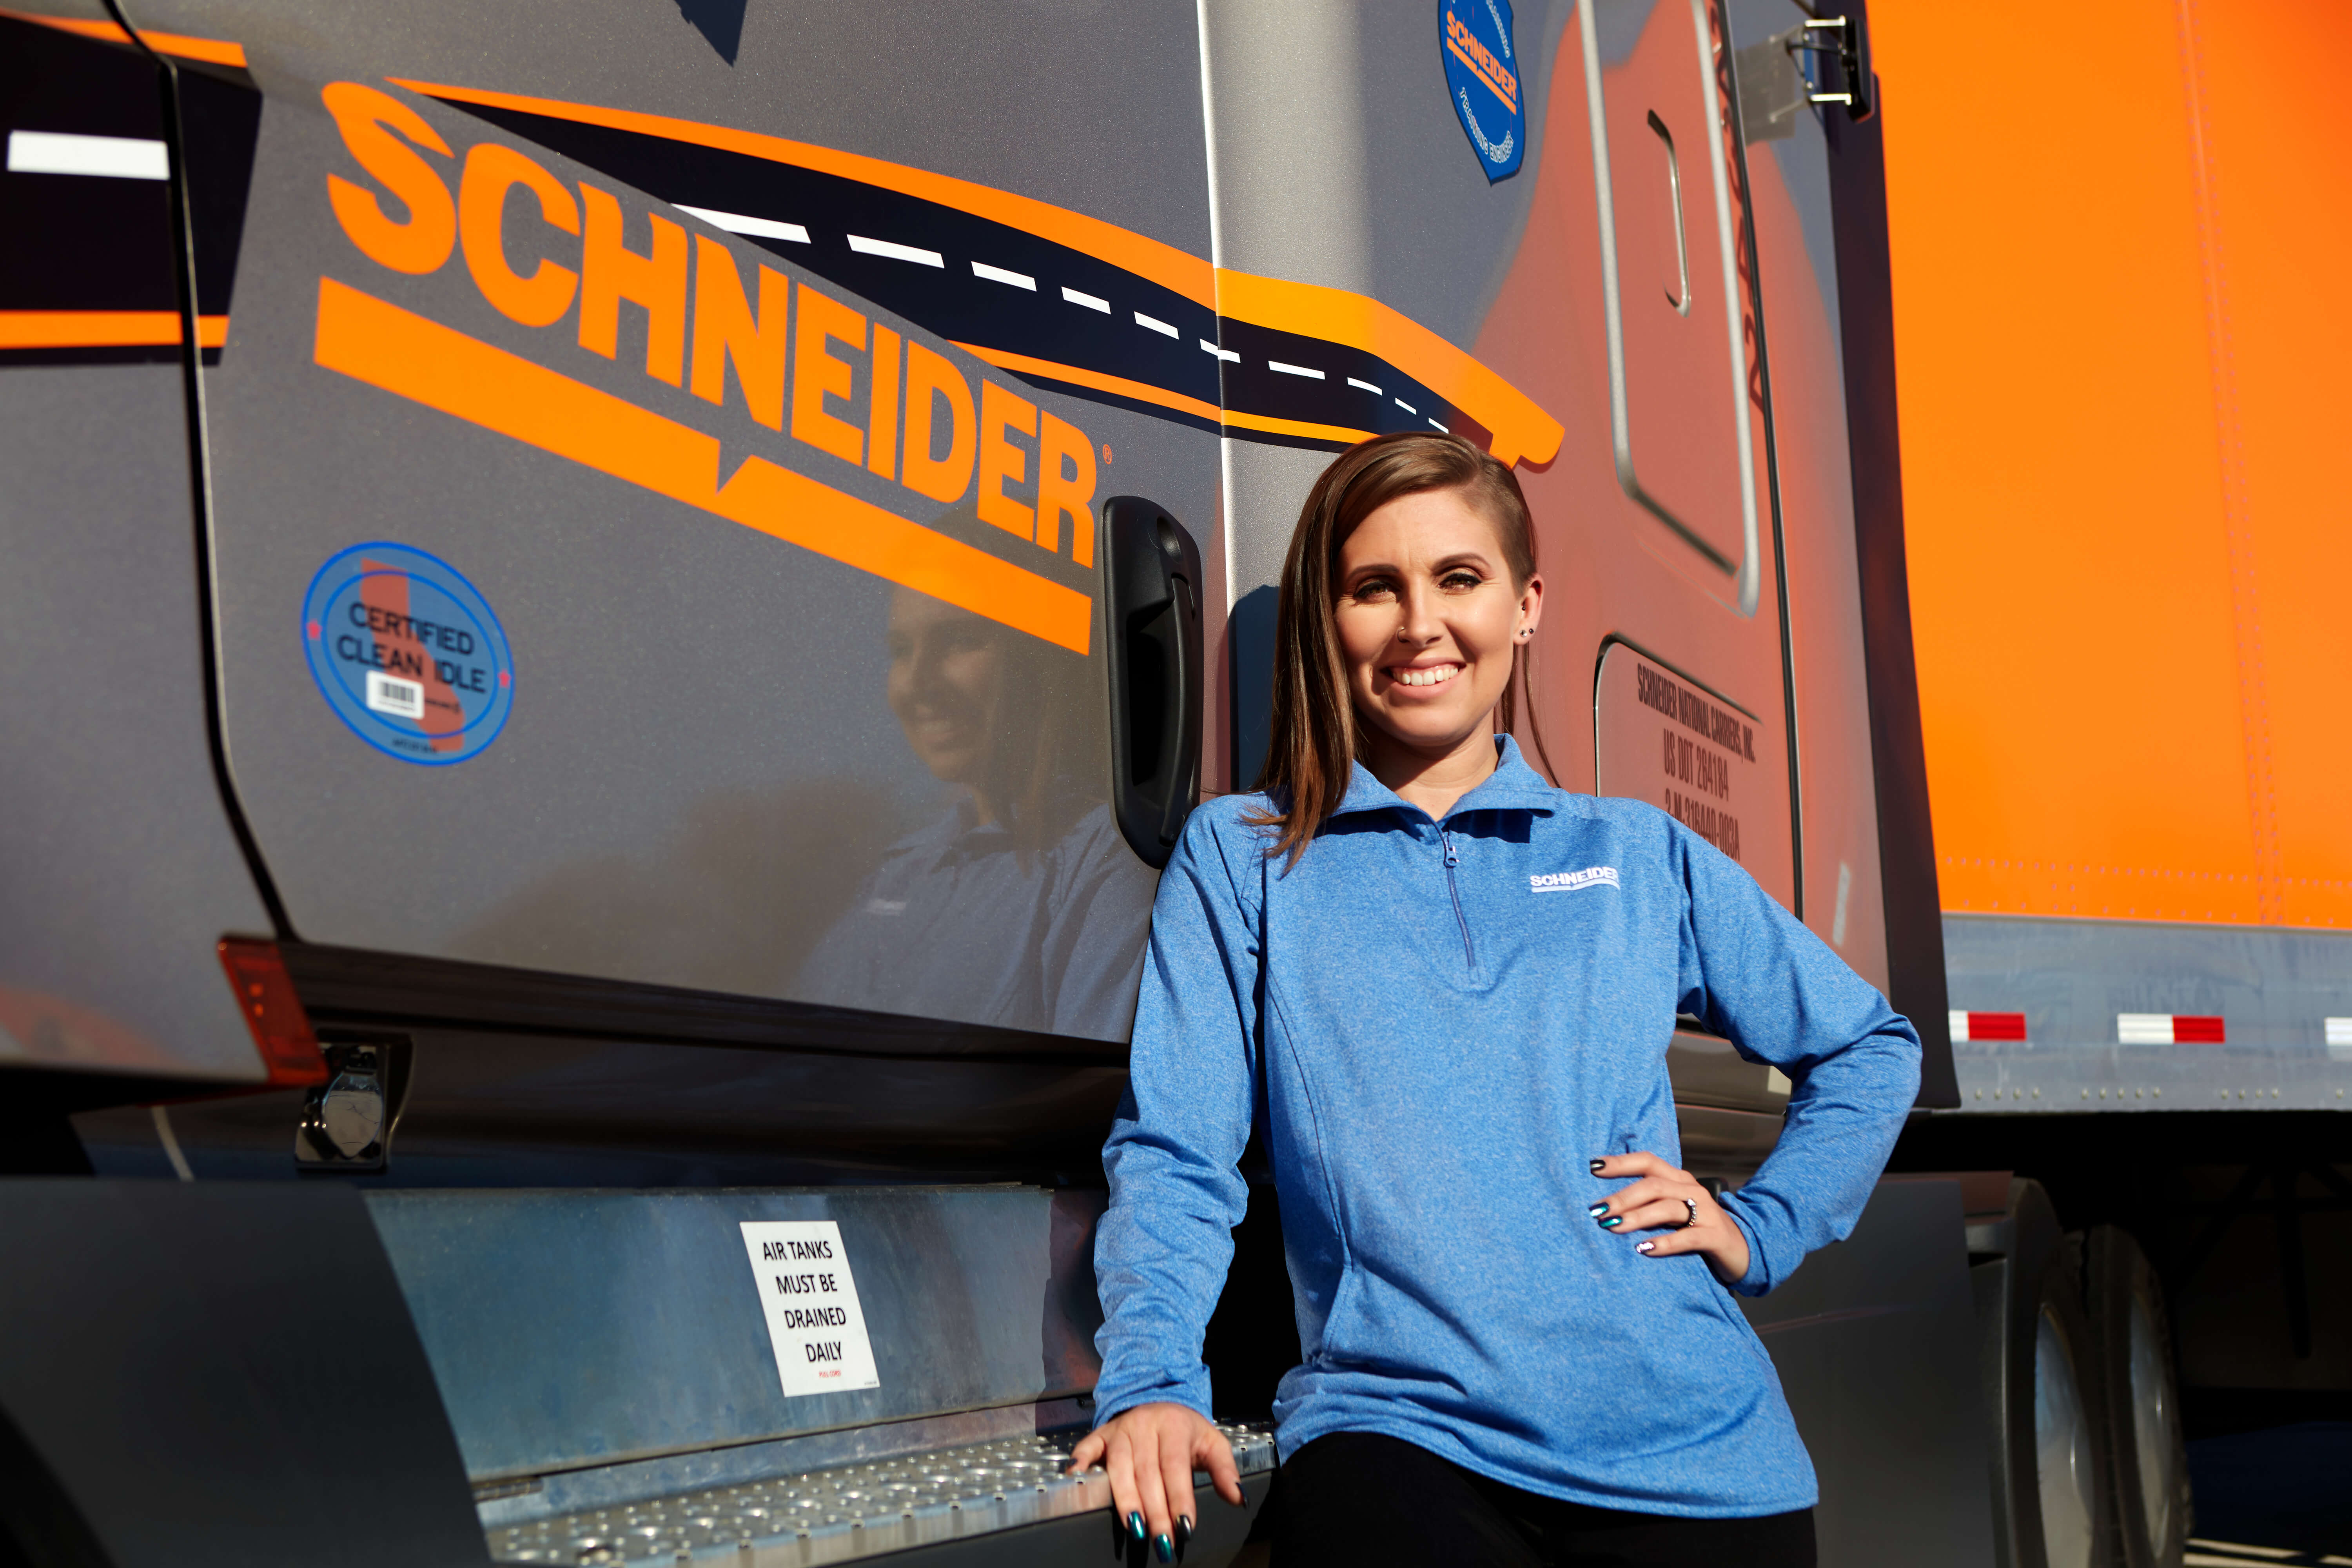 KayLeigh McCall poses in front of a champagne-colored Schneider tractor and an orange Schneider trailer.